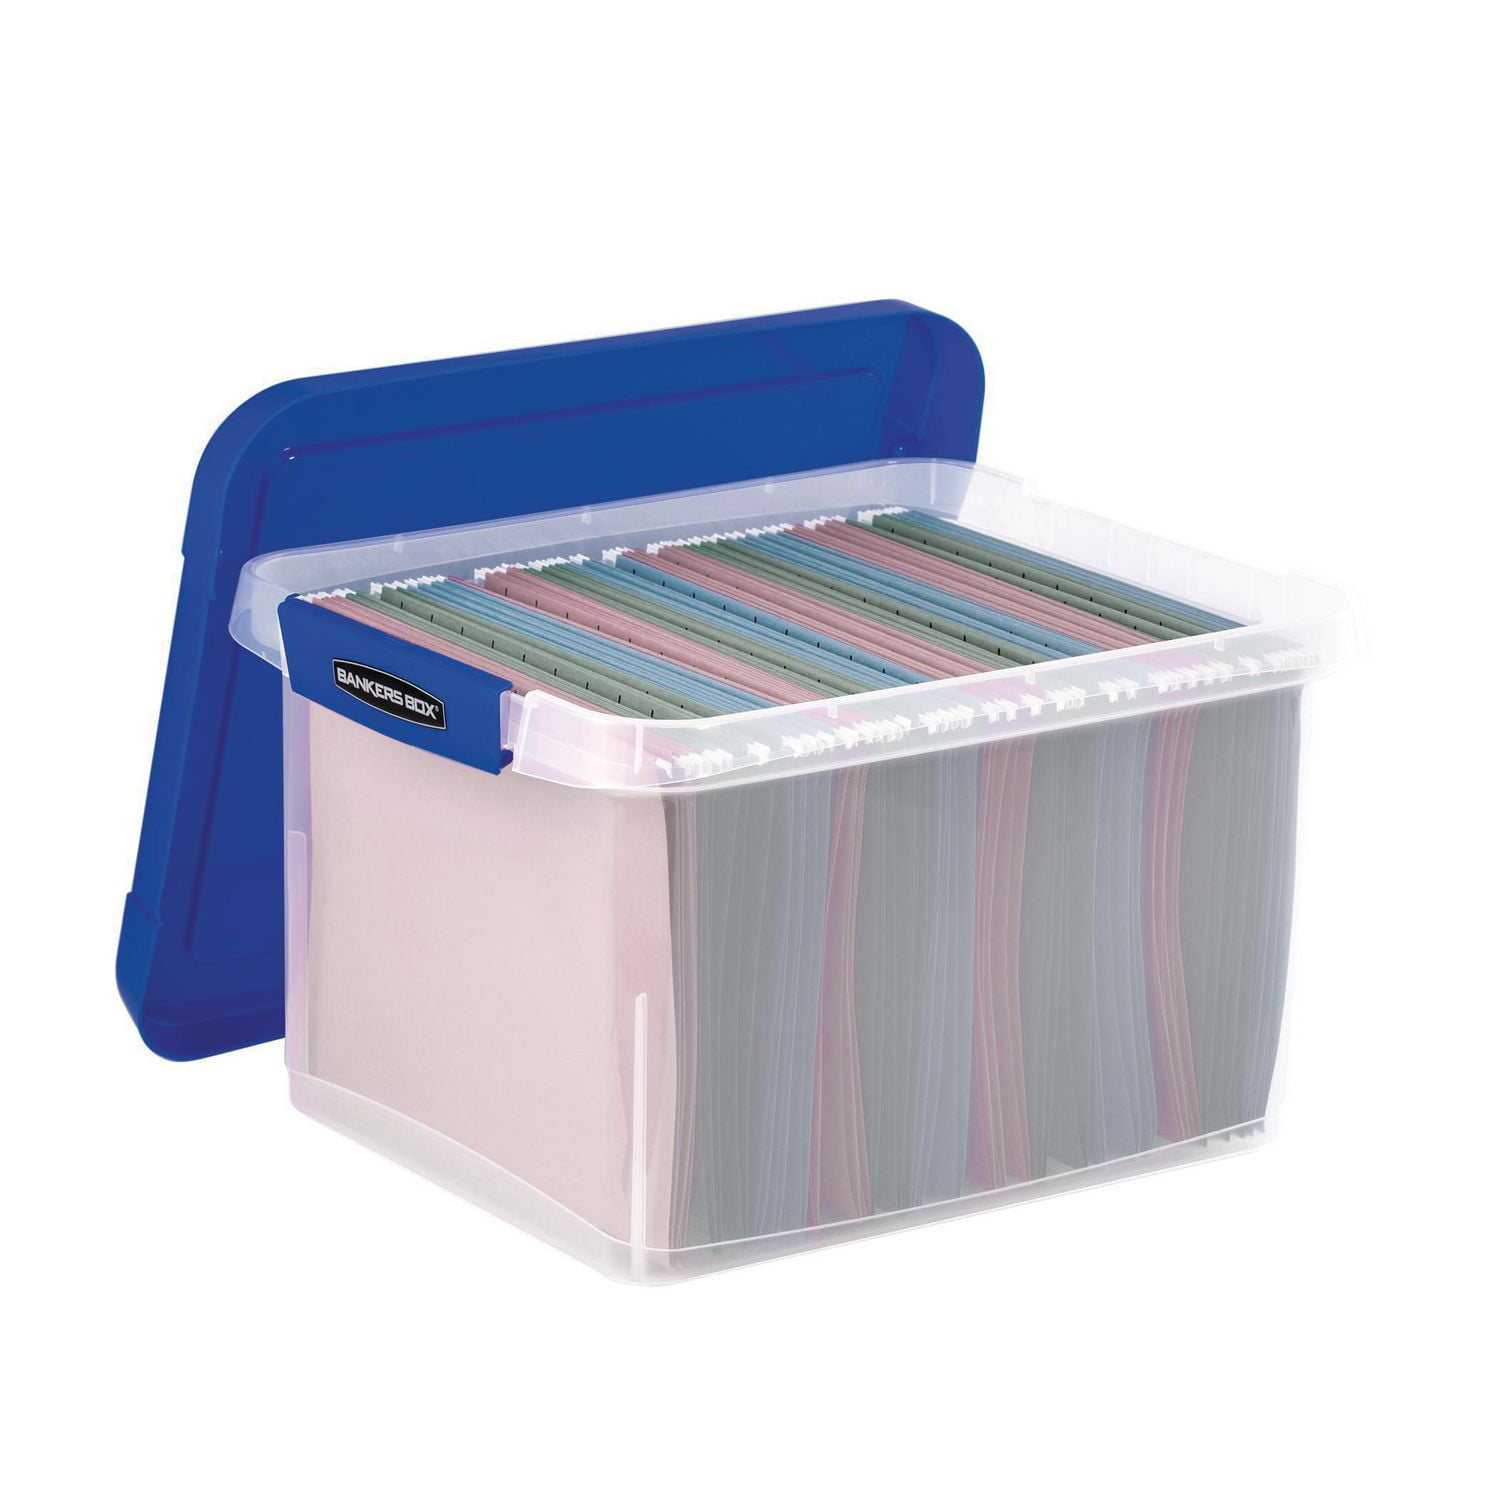 Bankers Box Heavy-duty Letter/Legal Plastic File Storage Box